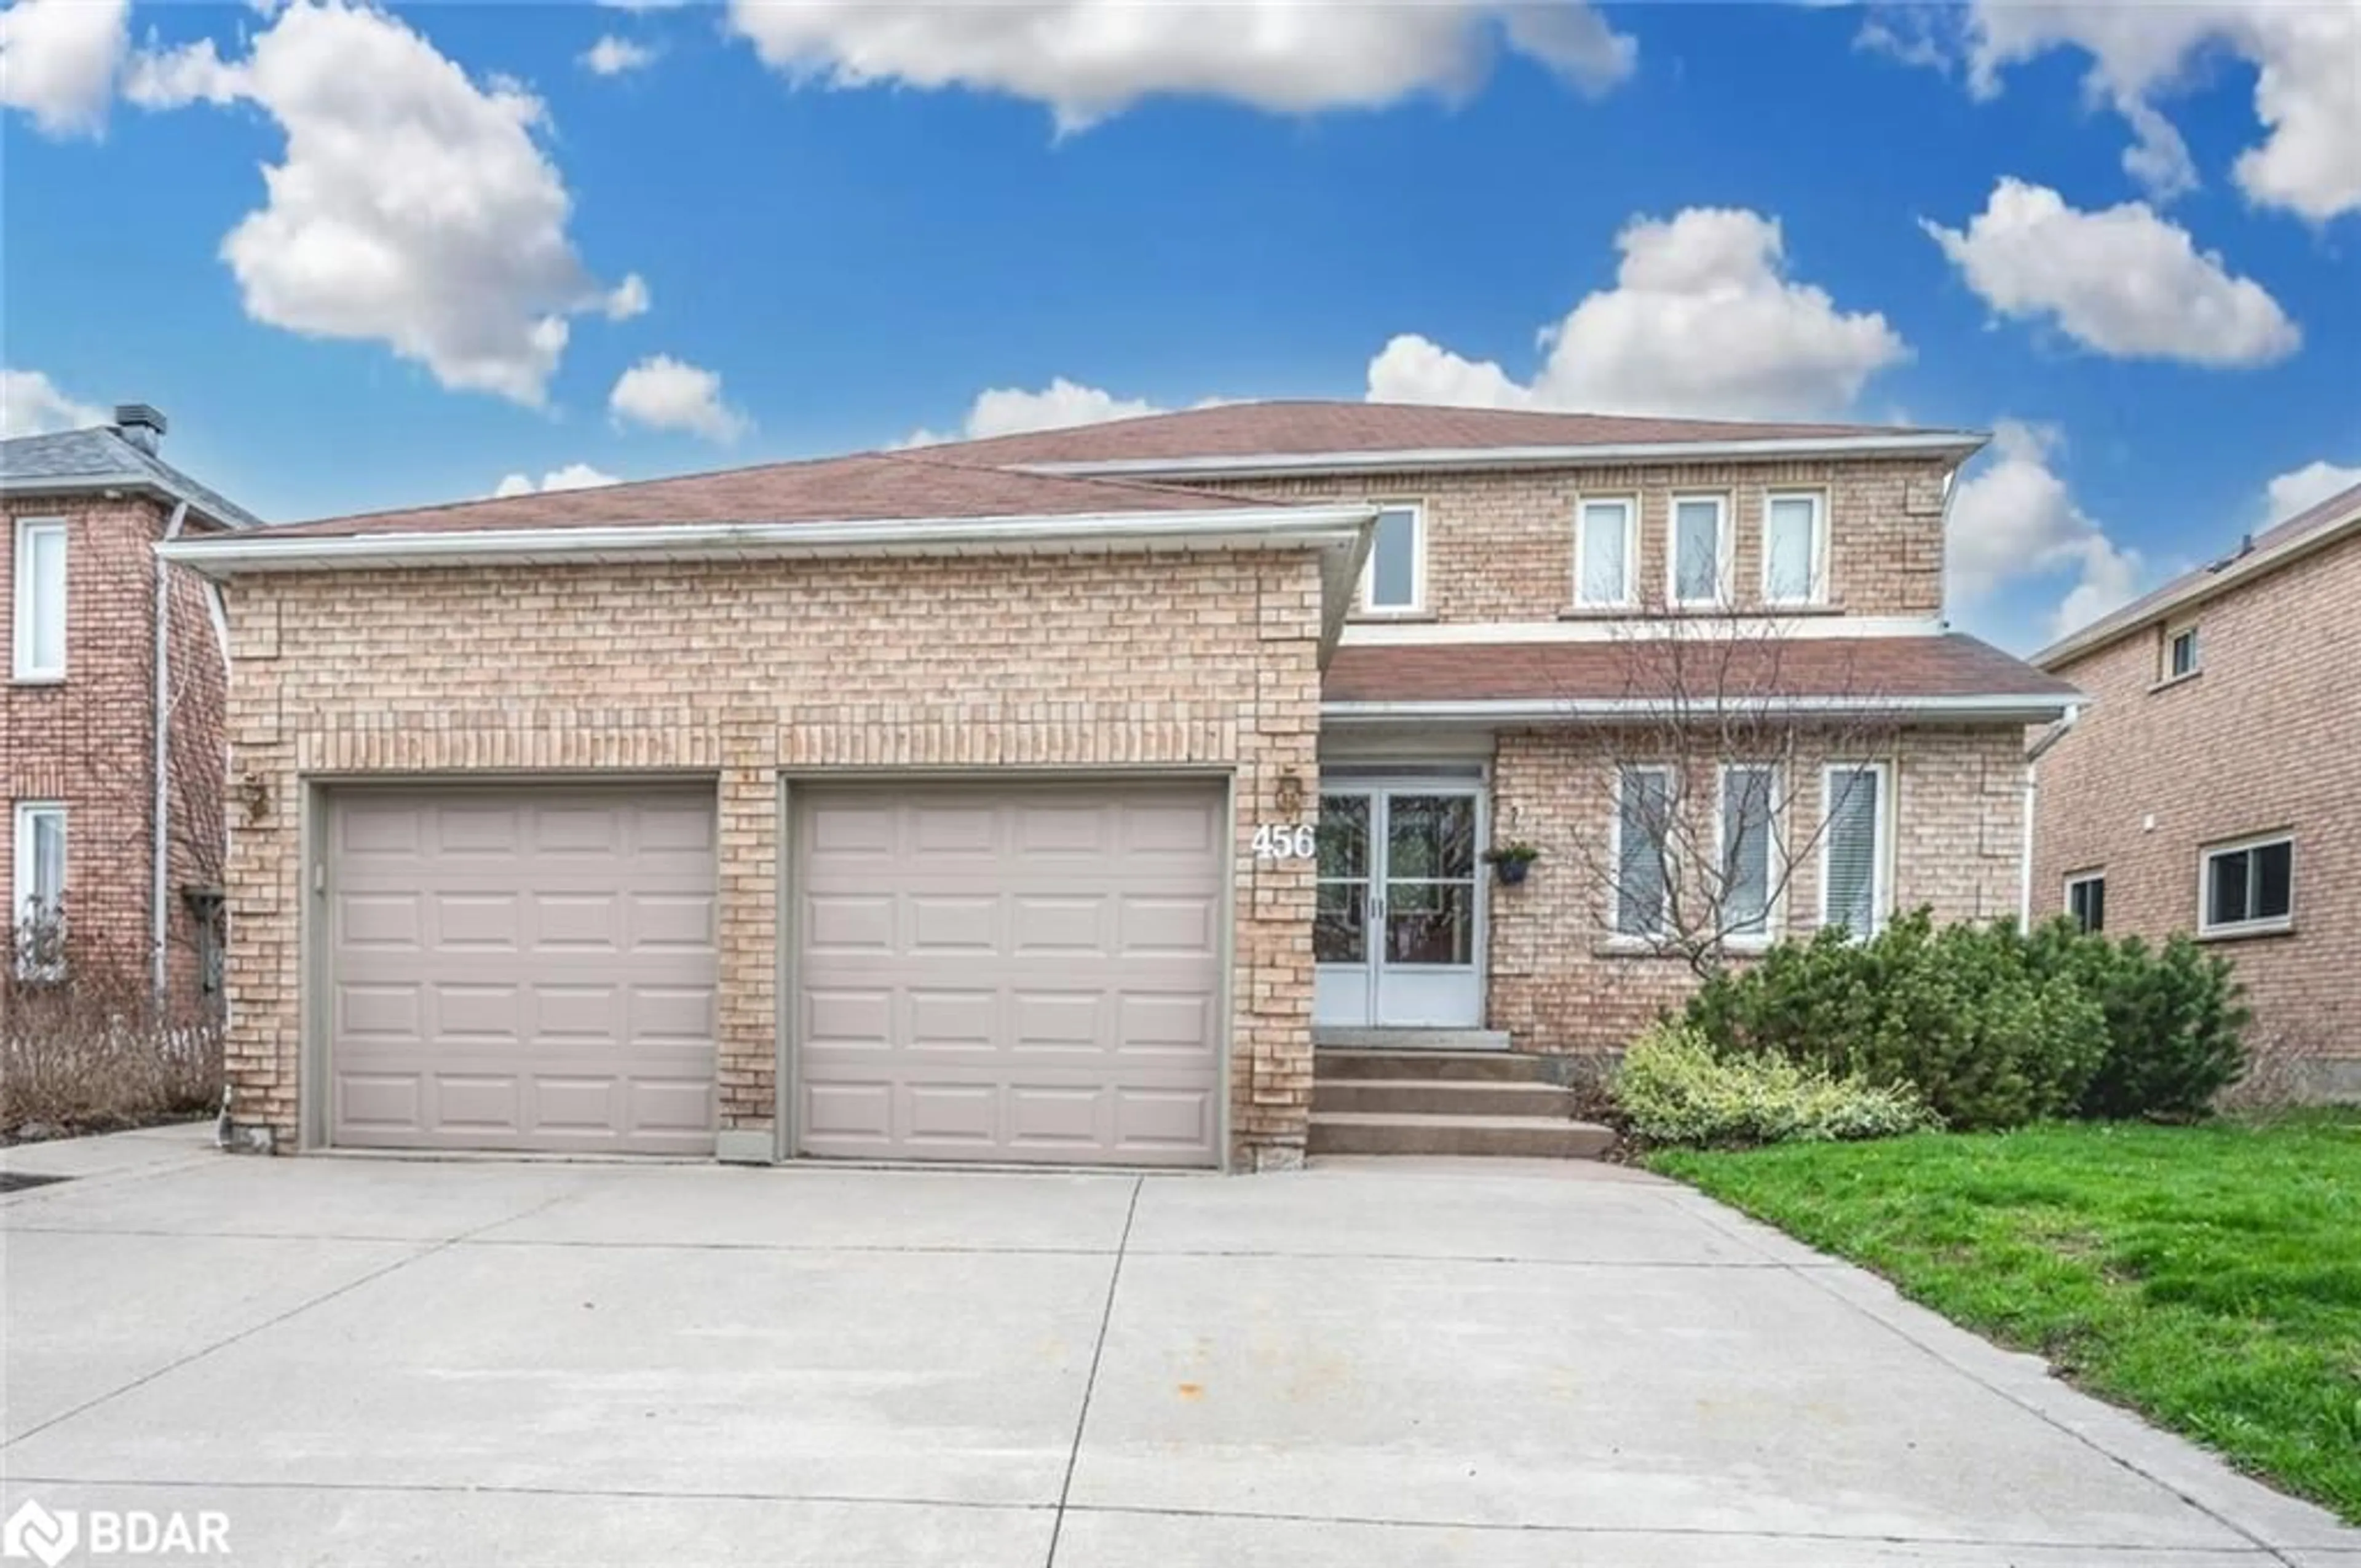 Home with brick exterior material for 456 St Vincent St, Barrie Ontario L4M 6T5